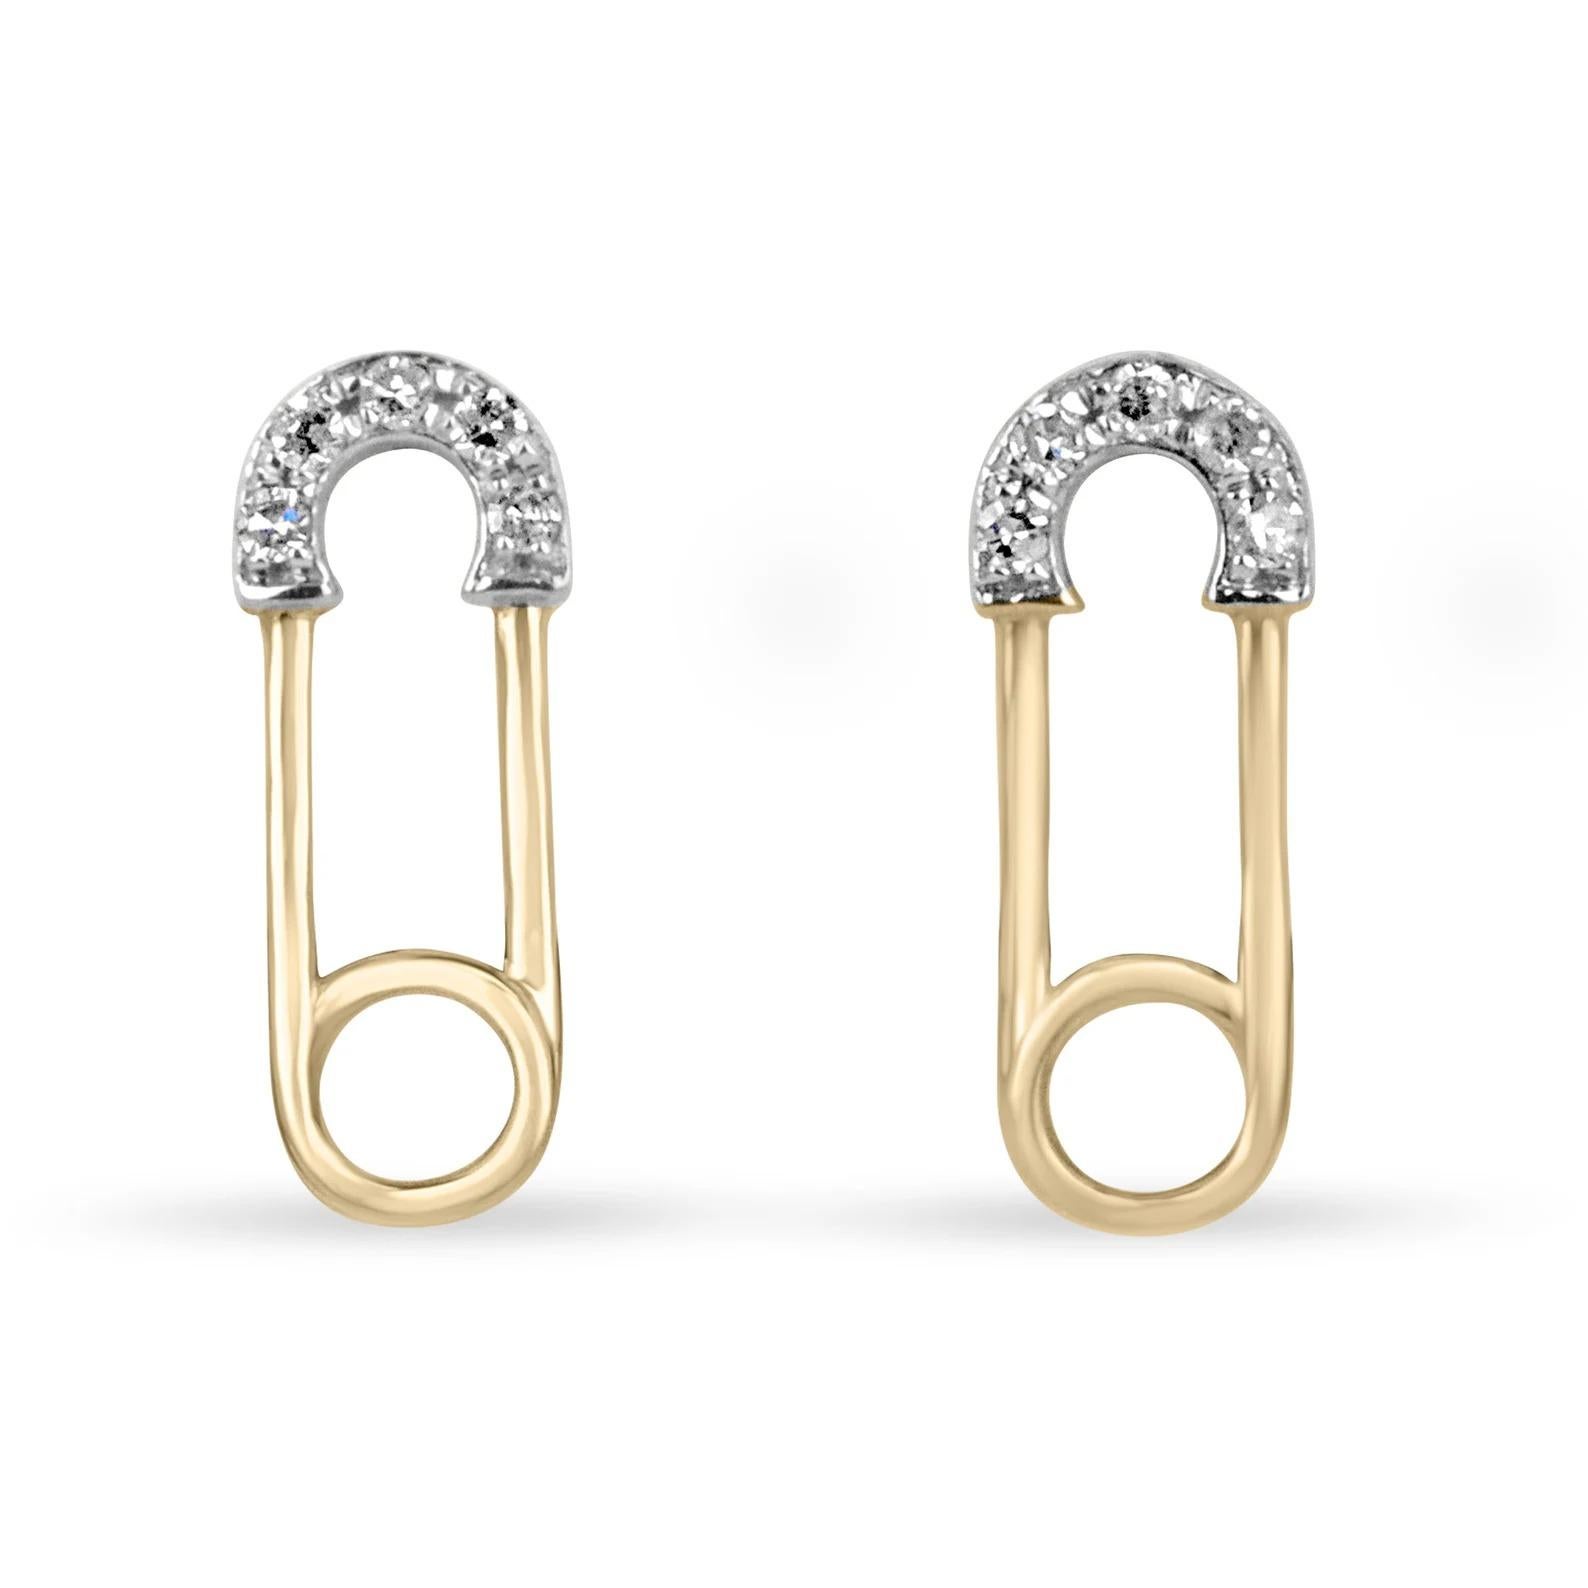 A trendy pair of diamond safety clip gold stud earrings. This petite pair showcases a detailed paperclip design, with a natural round-cut diamond rim accent; giving it a modern and trendy touch. Crafted in 14K gold, available in any color of choice.